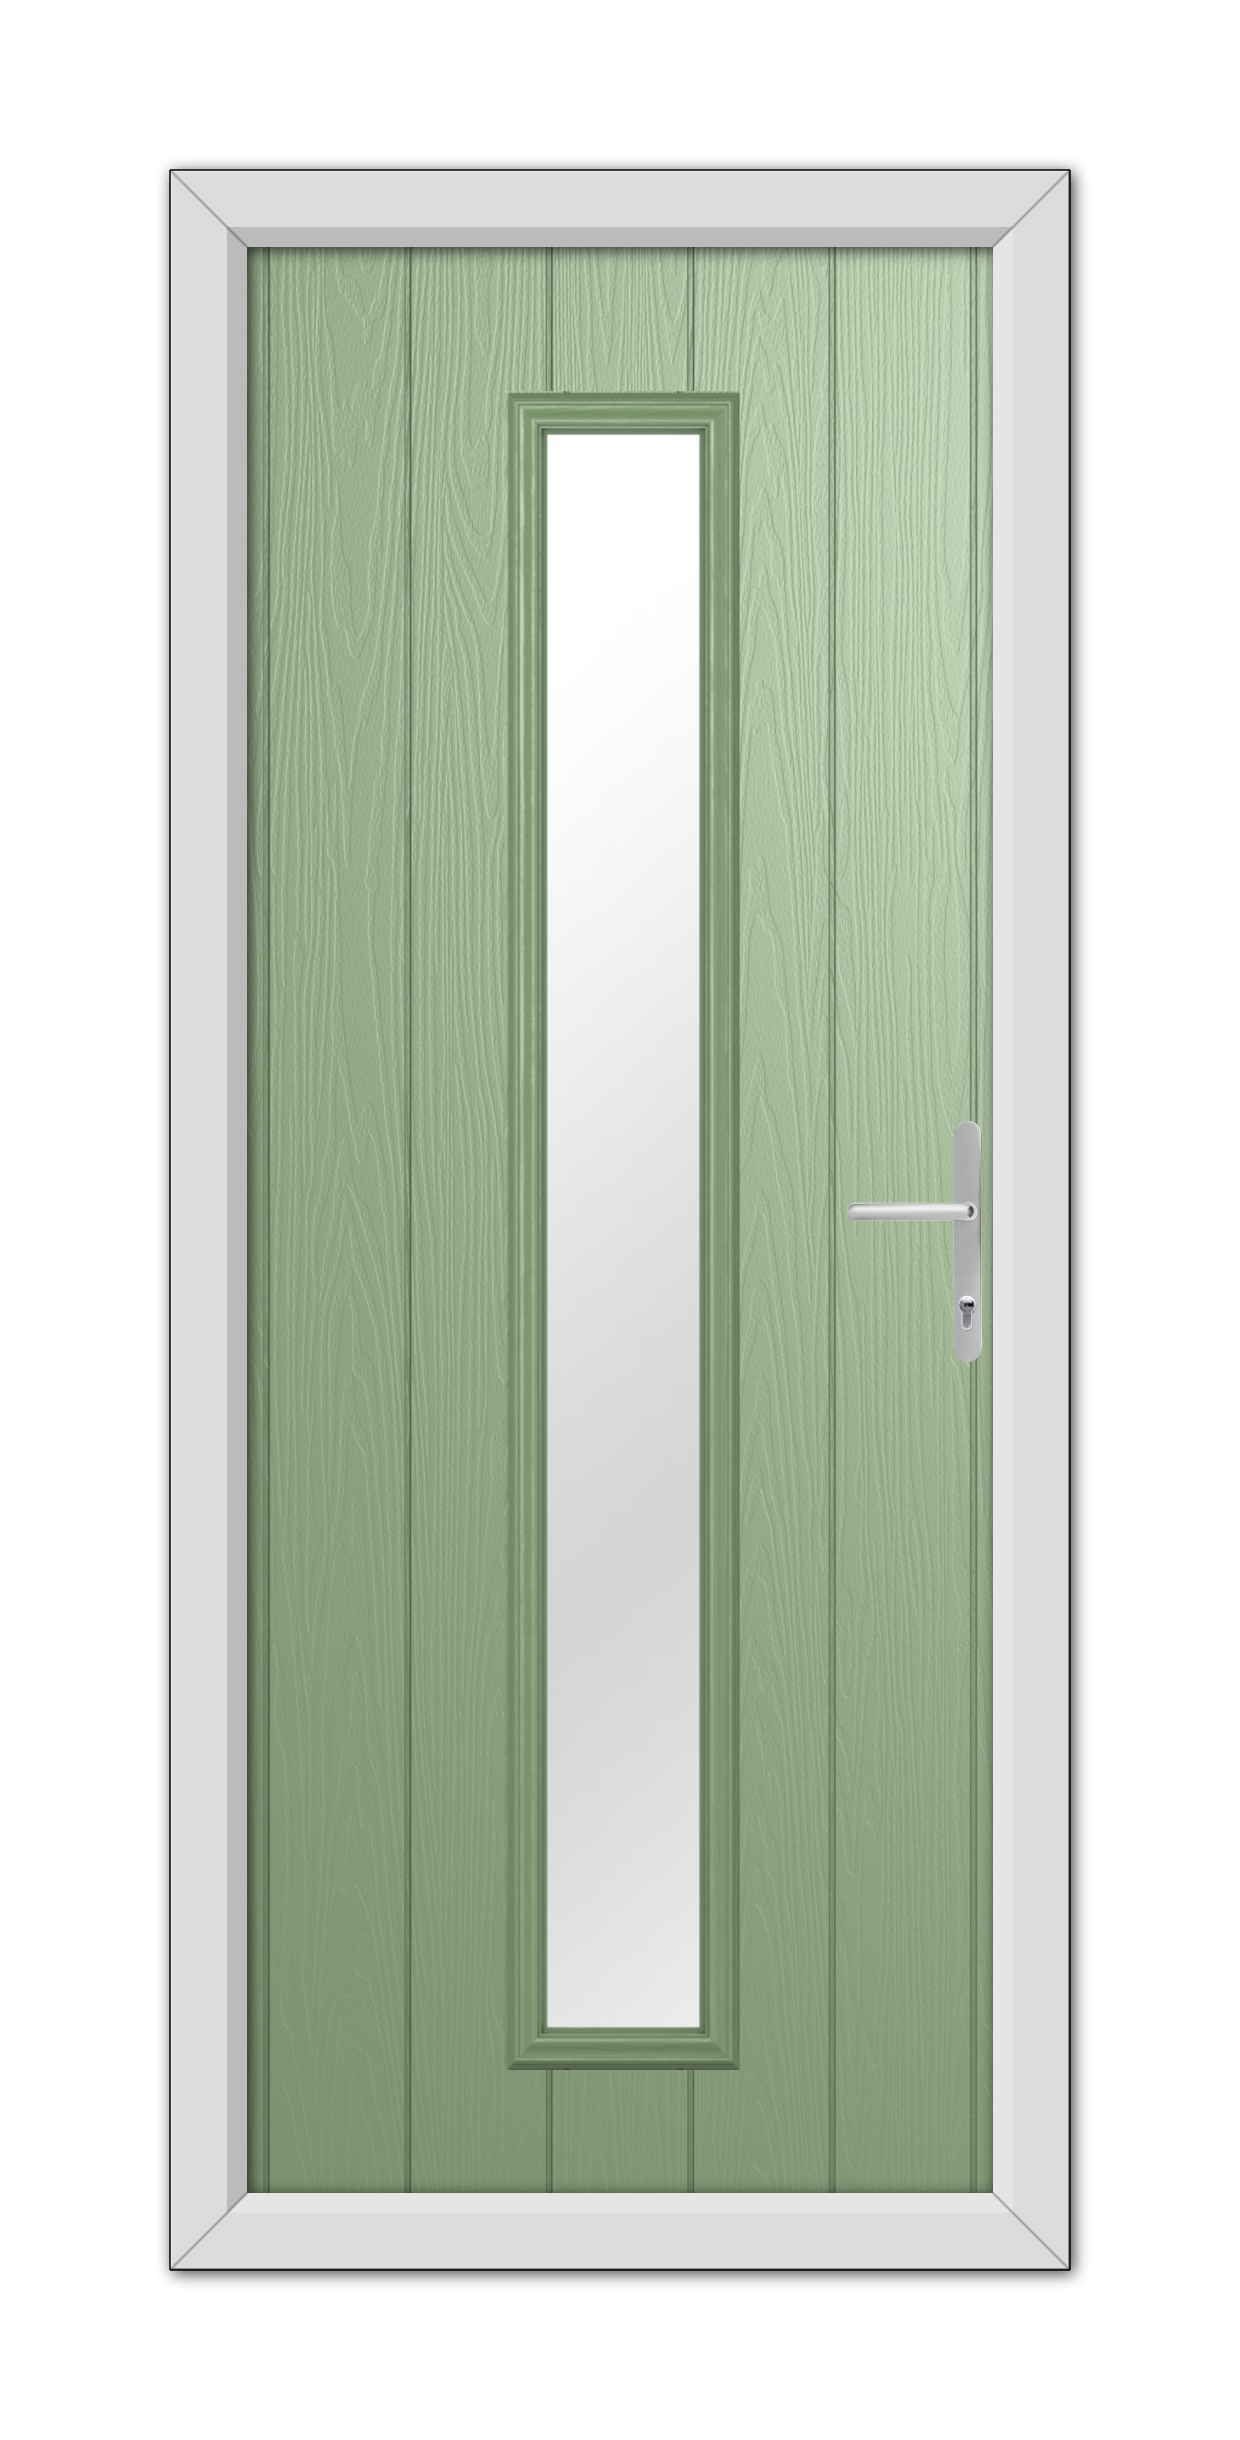 A Chartwell Green Rutland Composite Door 48mm Timber Core with a vertical rectangular window and a modern handle, set within a white frame.